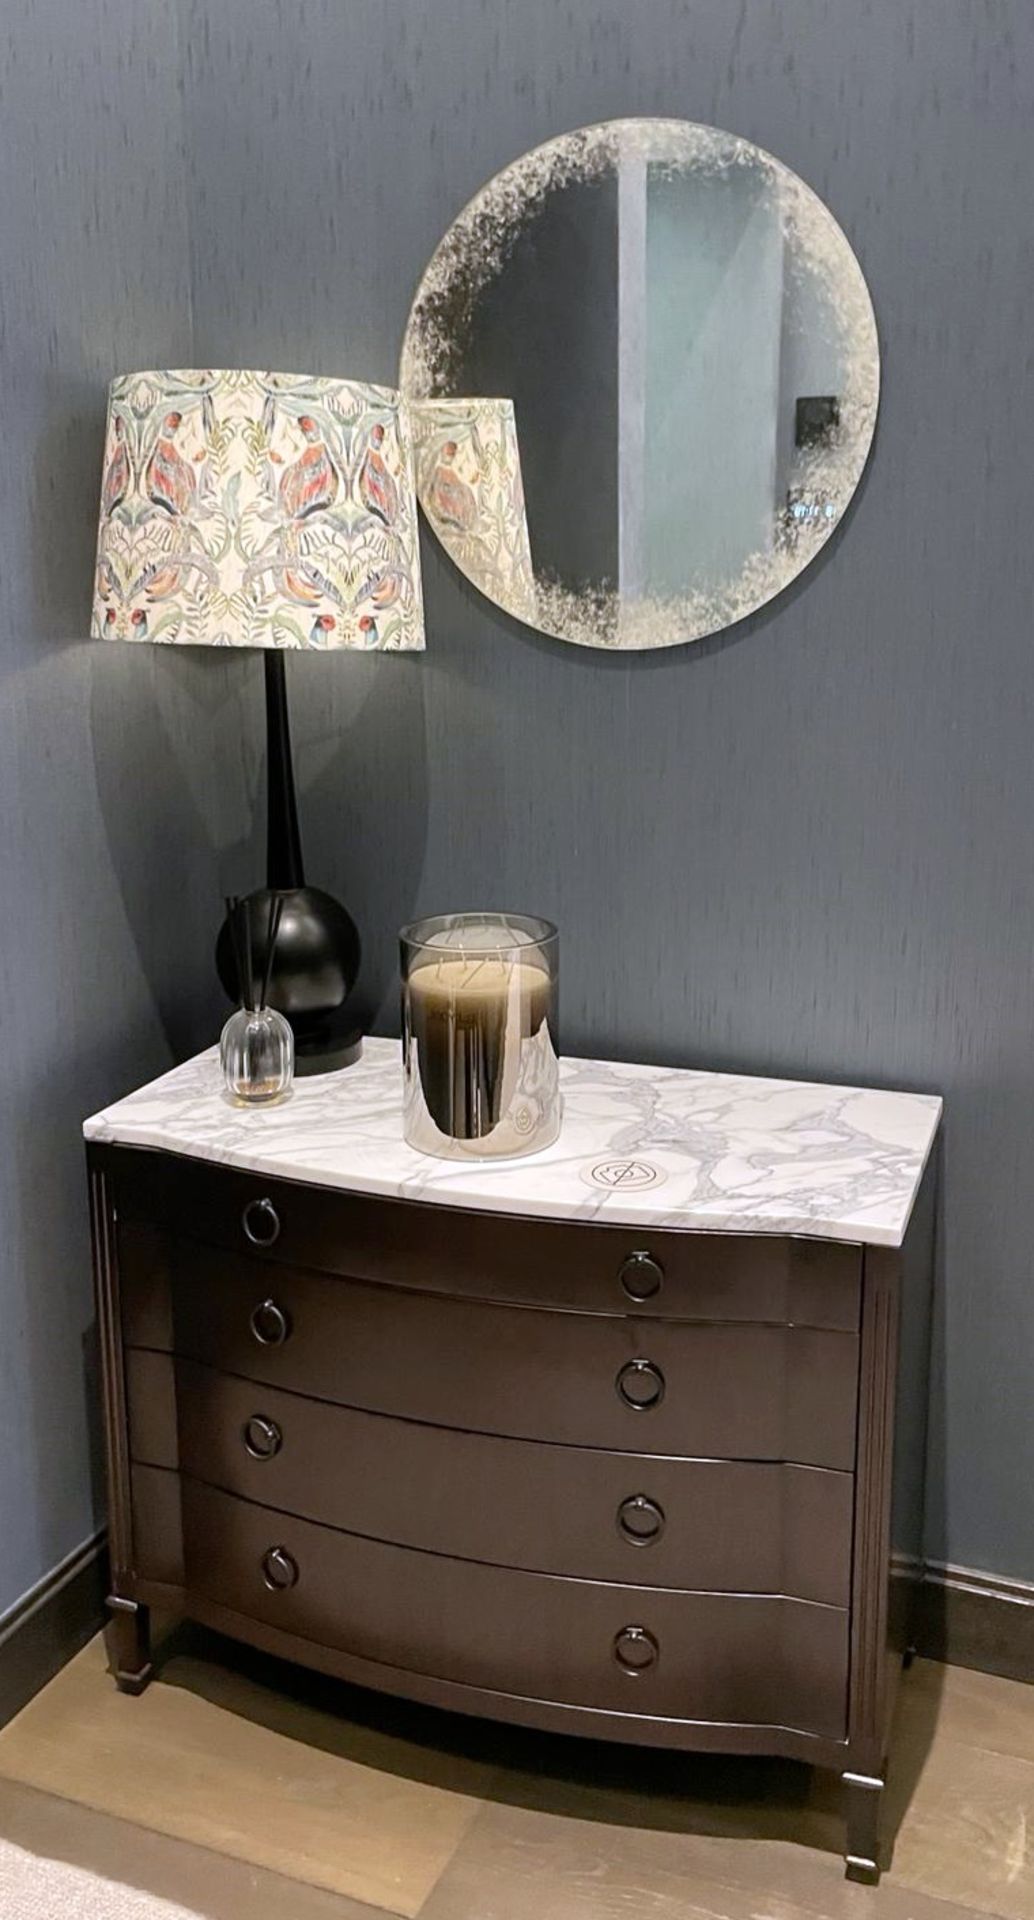 1 x Stylish Curved Chest of Drawers With Stone Top - CL894 - Ref: H/WY NO VAT ON THE HAMMER - - Image 5 of 9